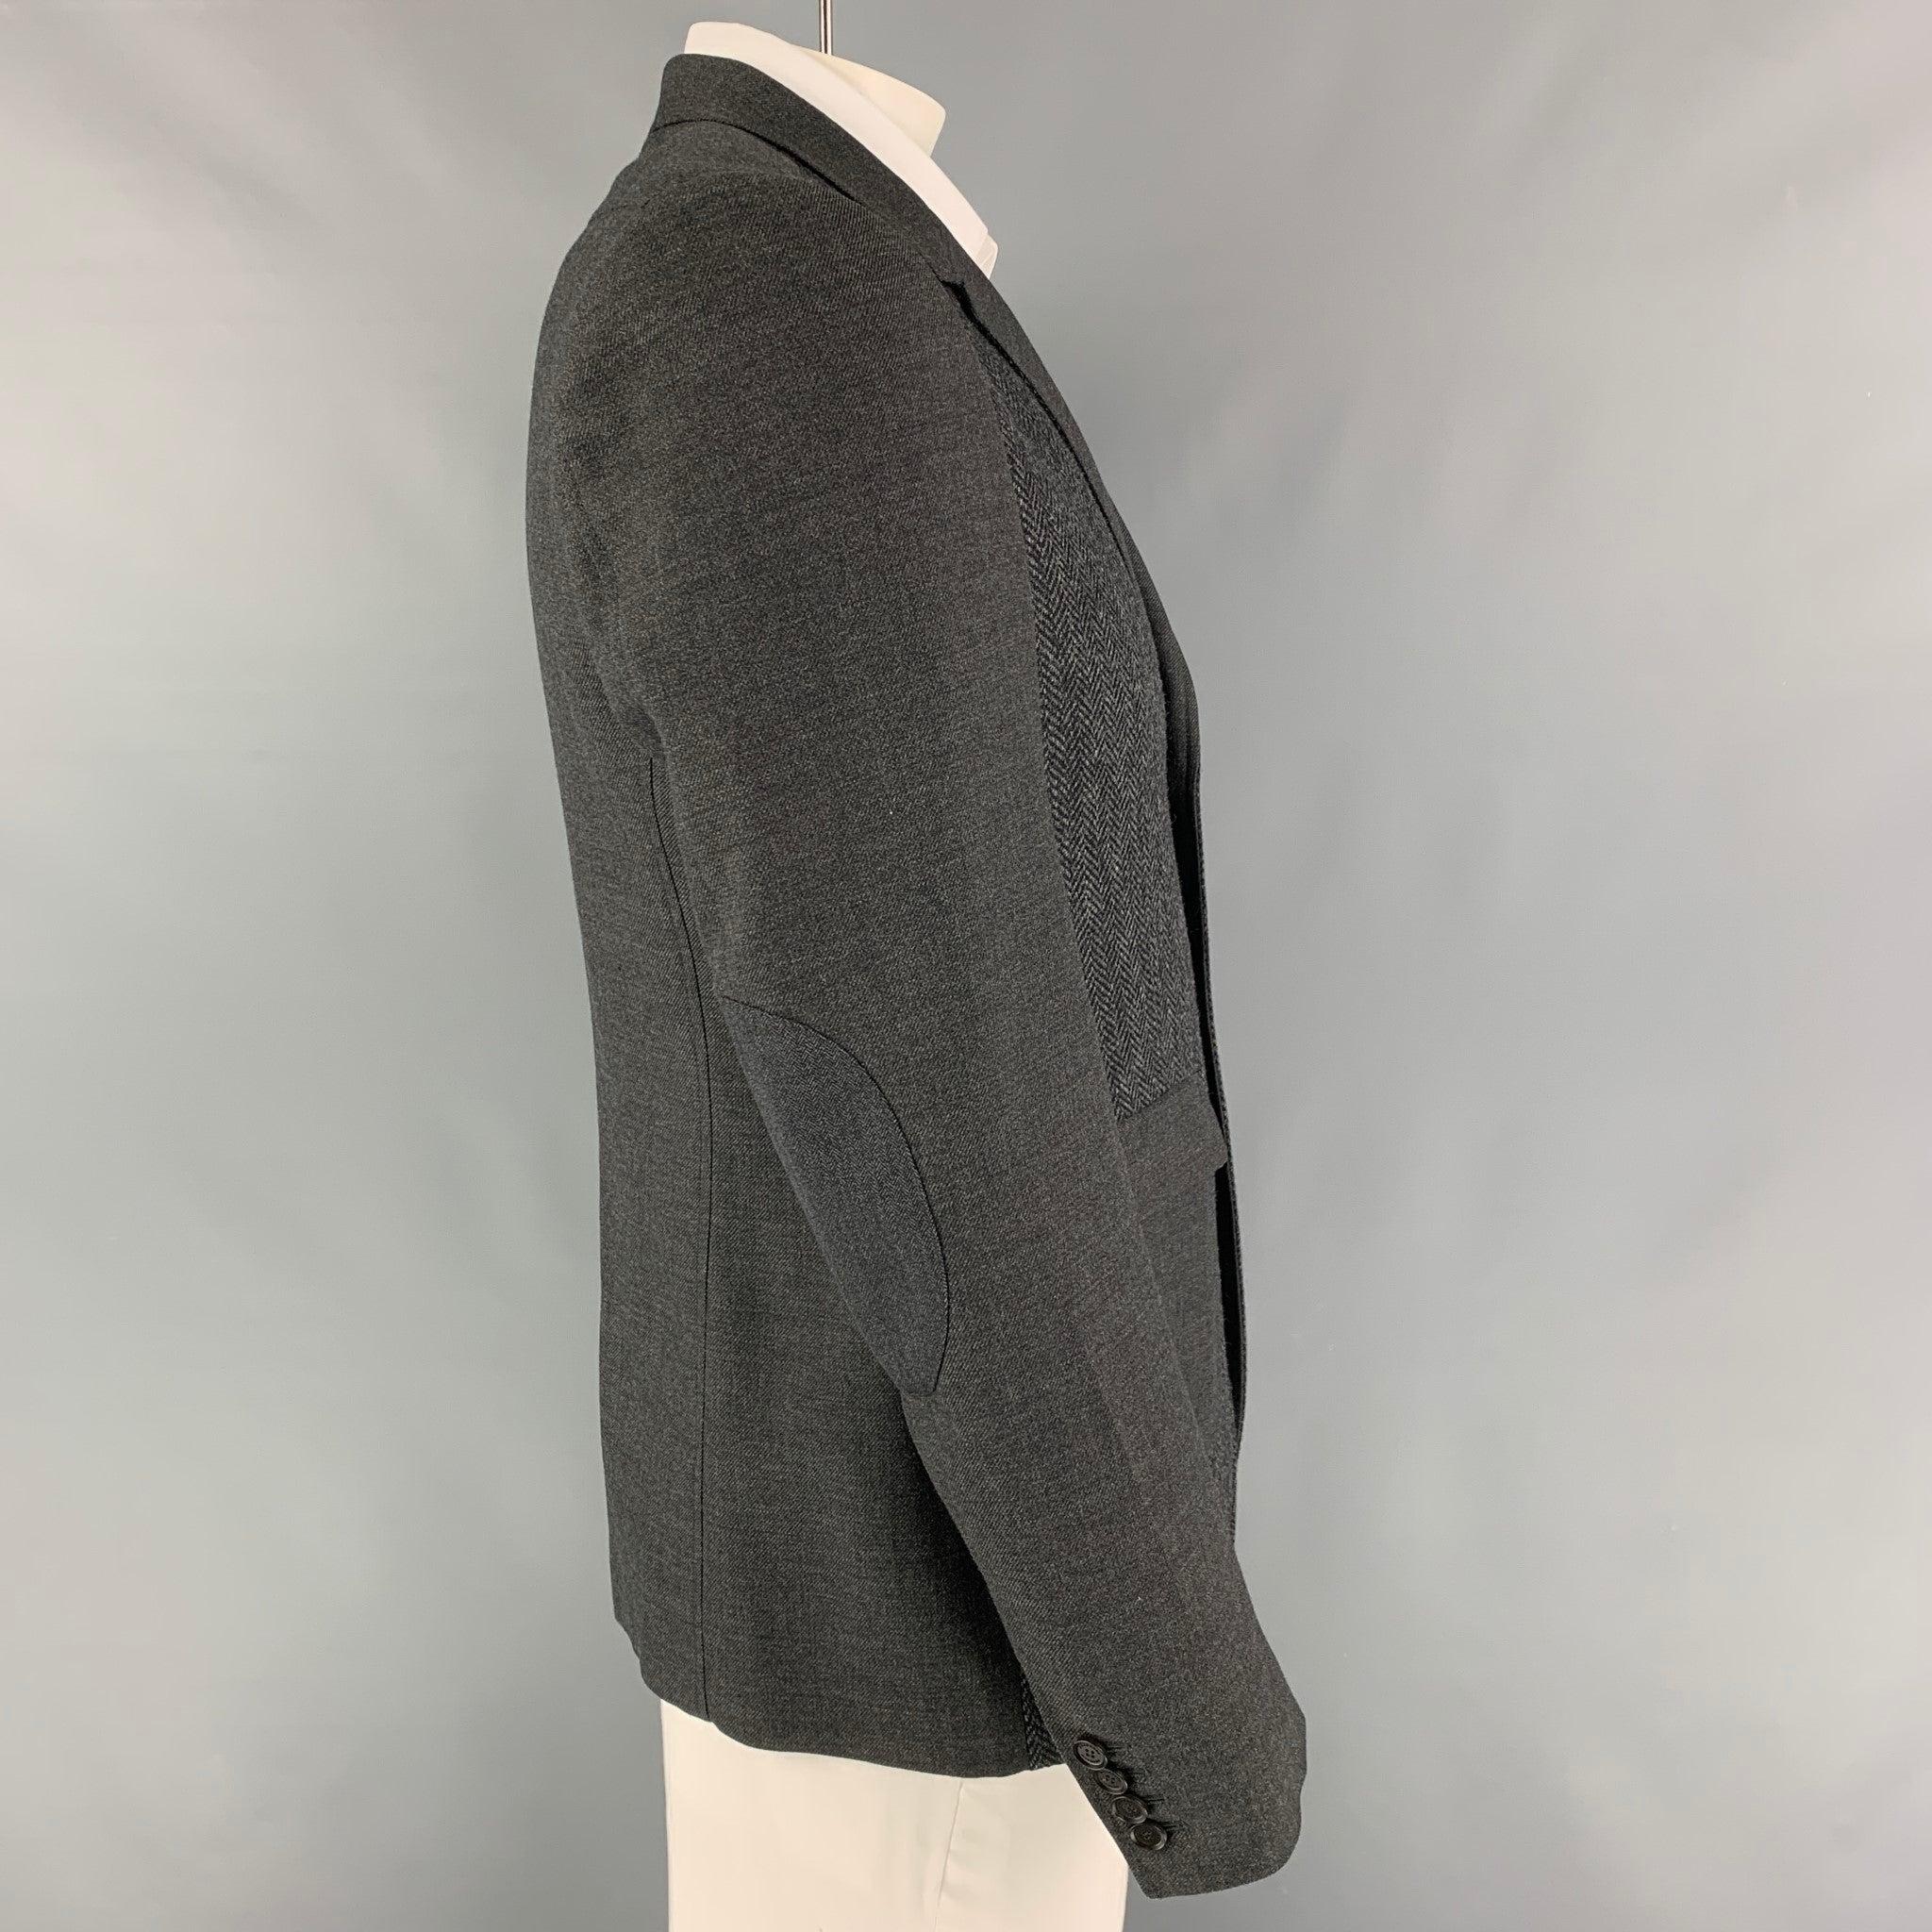 BURBERRY PRORSUM sport coat comes in a grey virgin wool with a full liner featuring a notch lapel, elbow patches, single back vent, flap pockets, and a two button closure. Made in Italy.
Excellent
Pre-Owned Condition. 

Marked:   54 

Measurements: